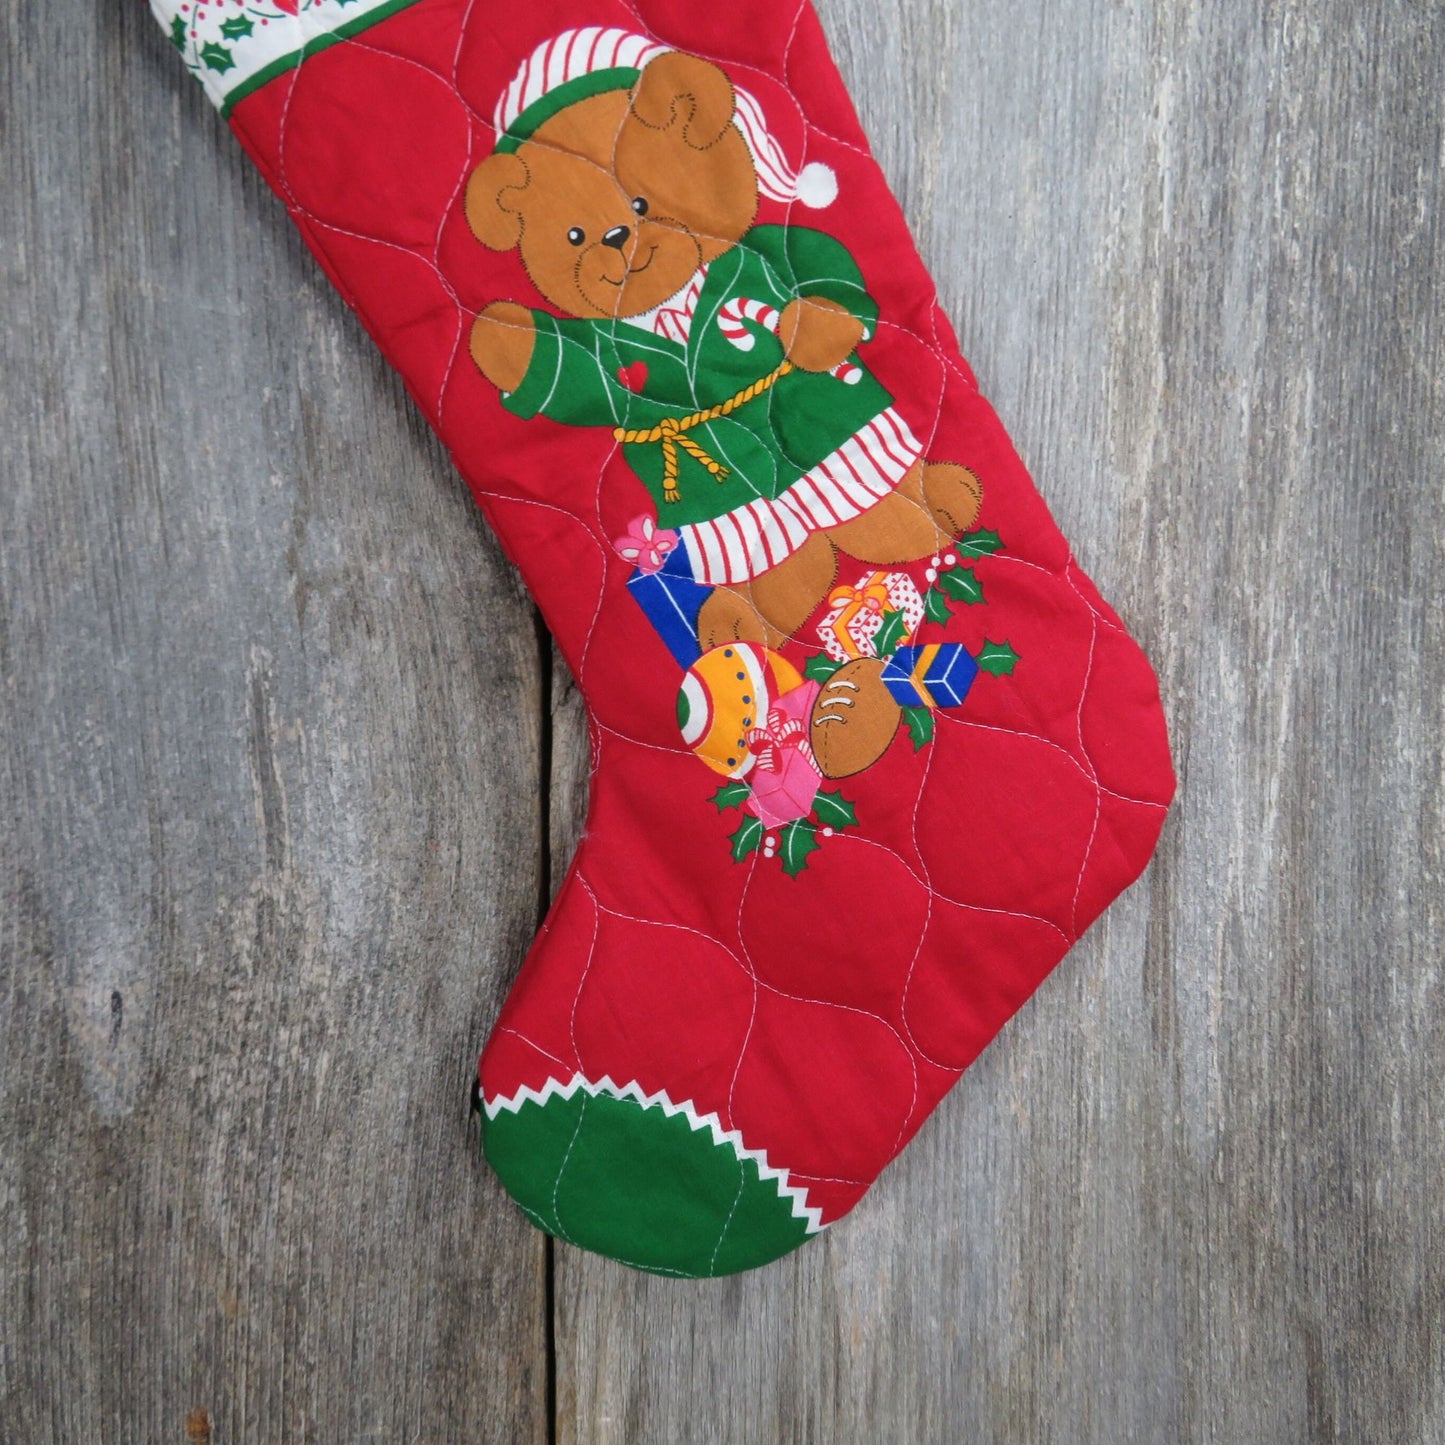 Vintage Teddy Bear Boy Christmas Stocking Quilted Handmade Fabric Red Green Cloth  st282